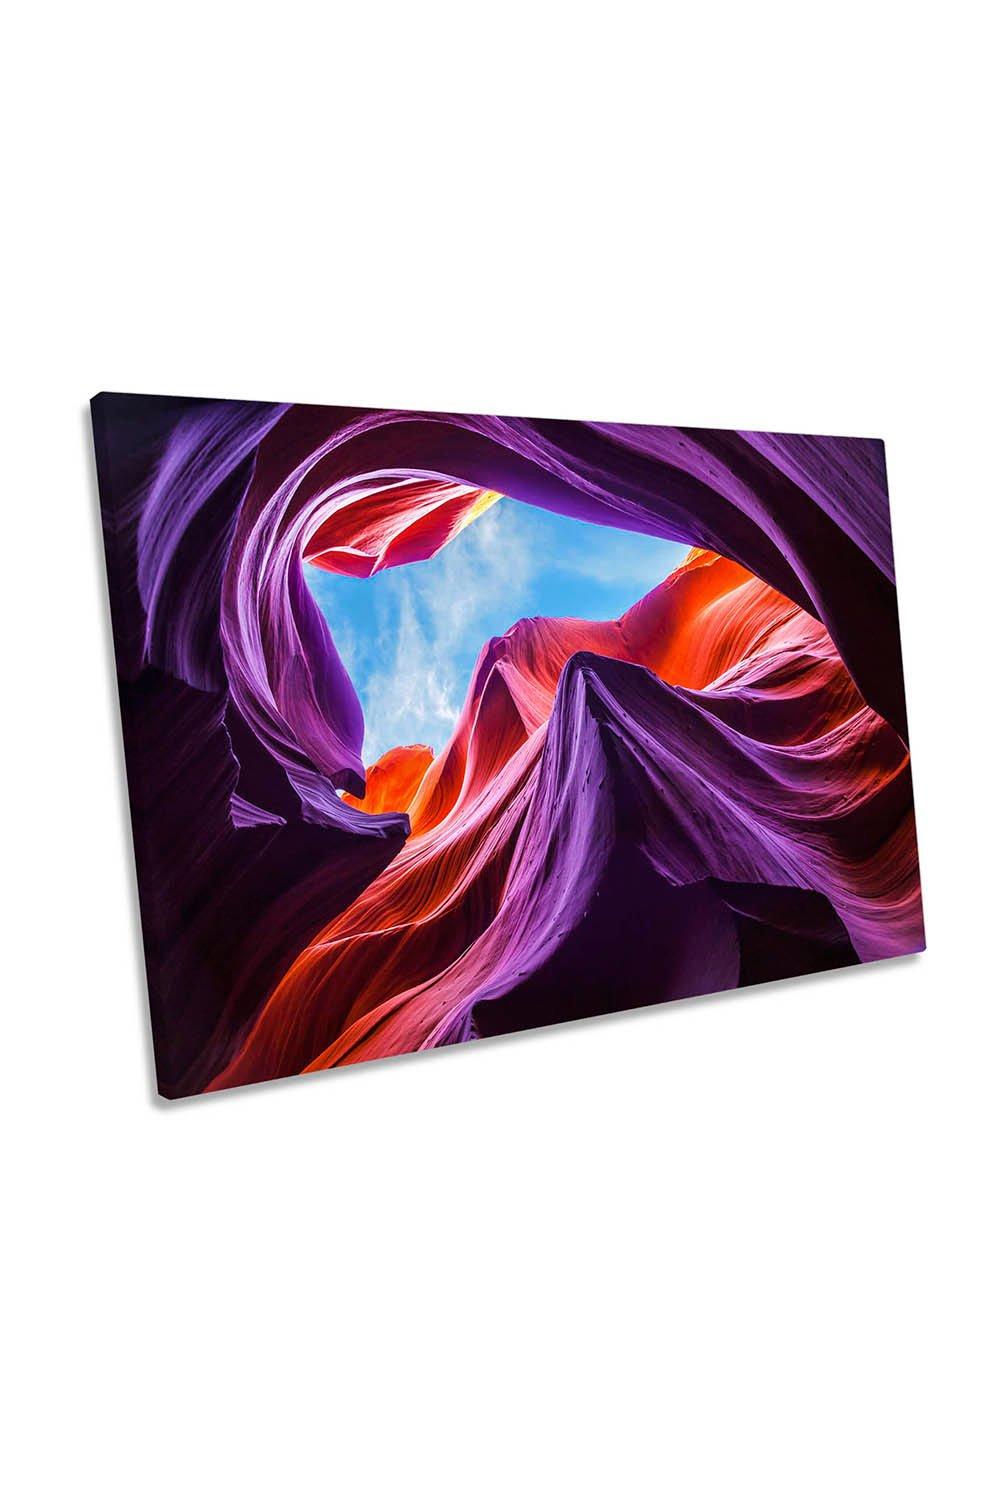 Magical Antelope Canyon Canvas Wall Art Picture Print